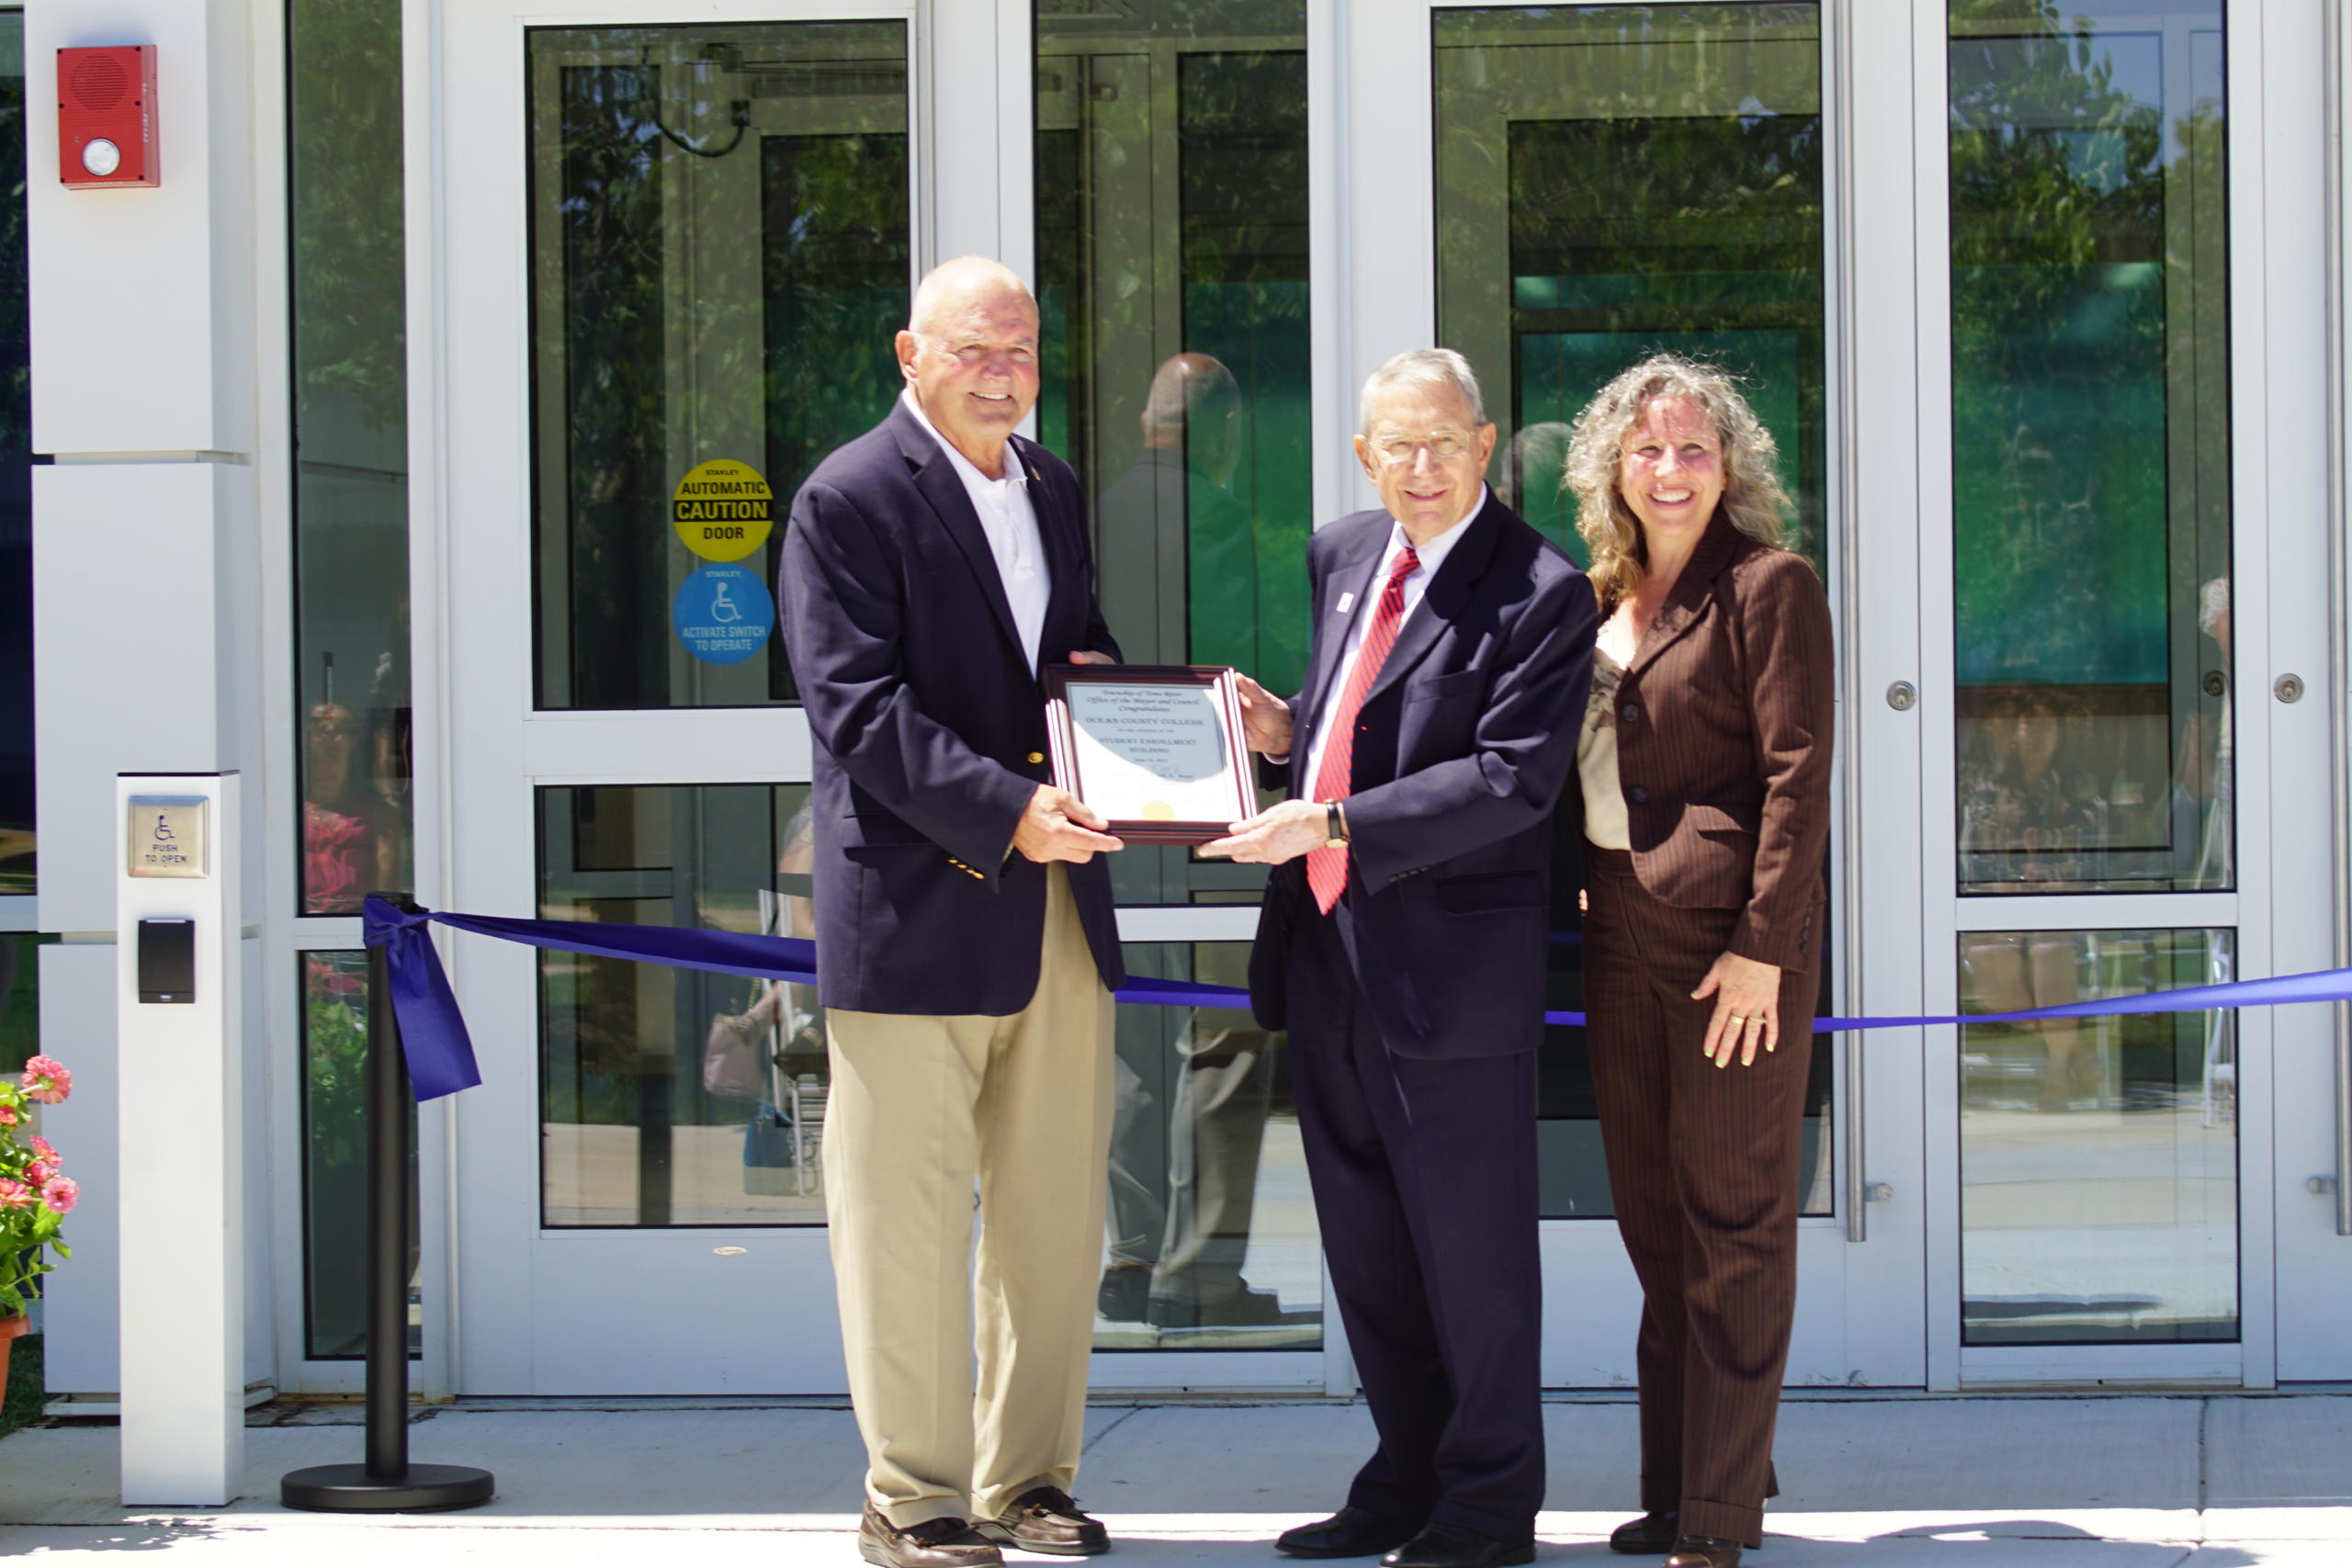 Dr. Jon H. Larson, OCC’s president, center, poses with a plaque commemorating the establishment of the new building from the Mayor of Toms River, Maurice B. Hill. Dr. Larson is joined by Mayor Hill and Toms River Councilwoman Laurie Huryk.